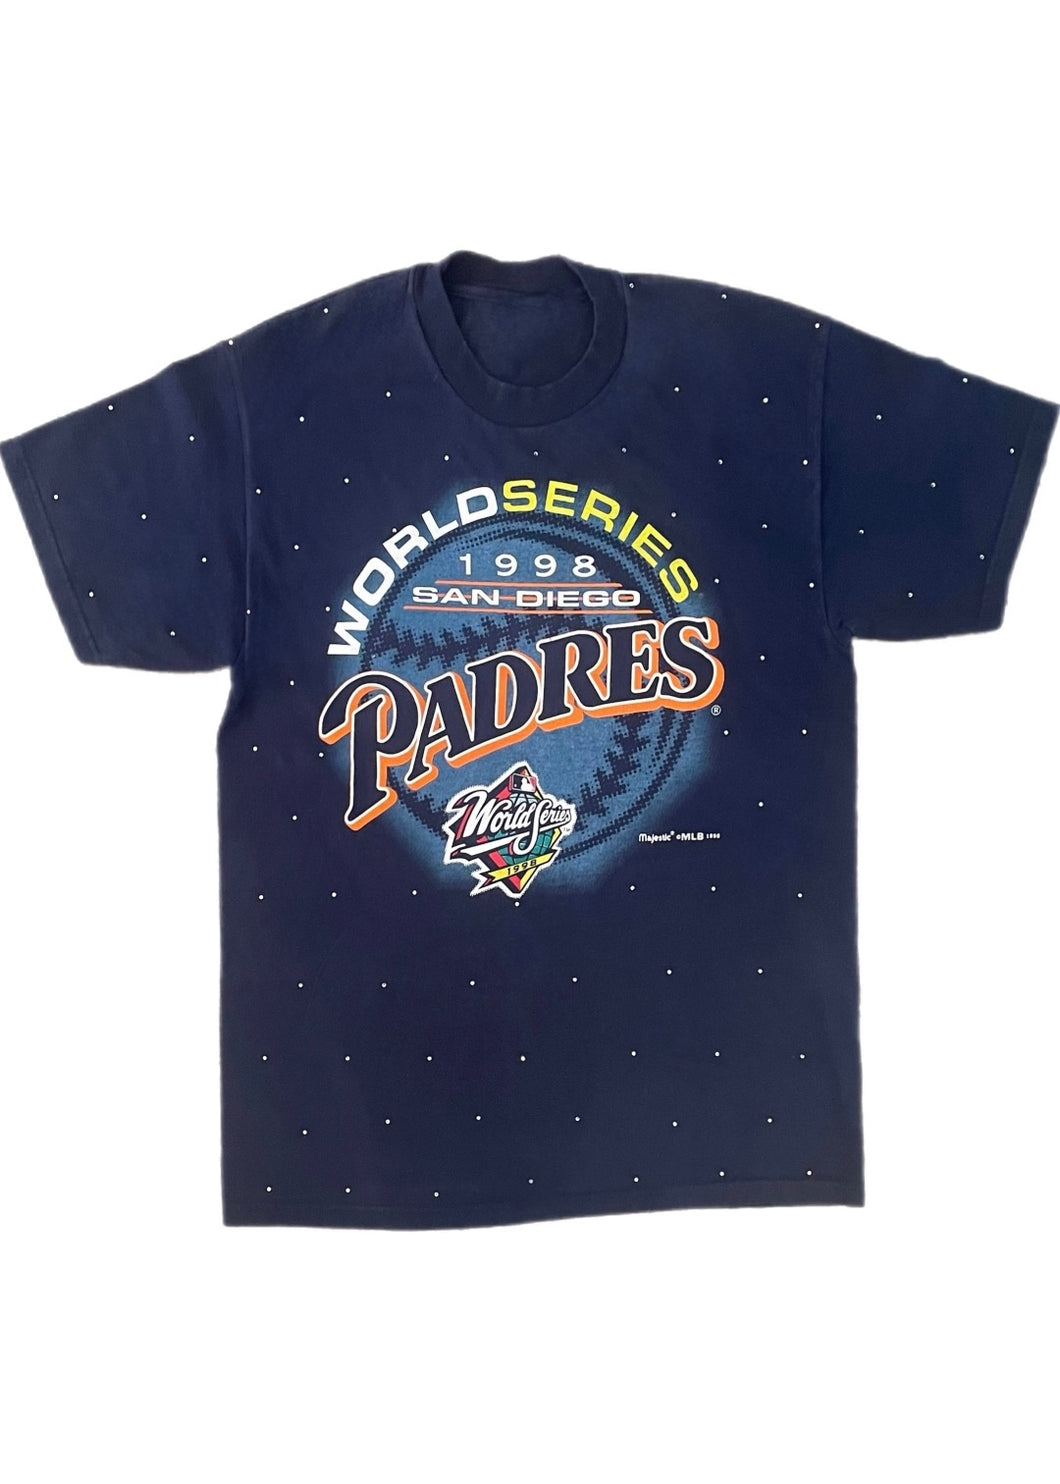 San Diego Padres, MLB One of a KIND Vintage Tee Shirt with all over Crystal Design